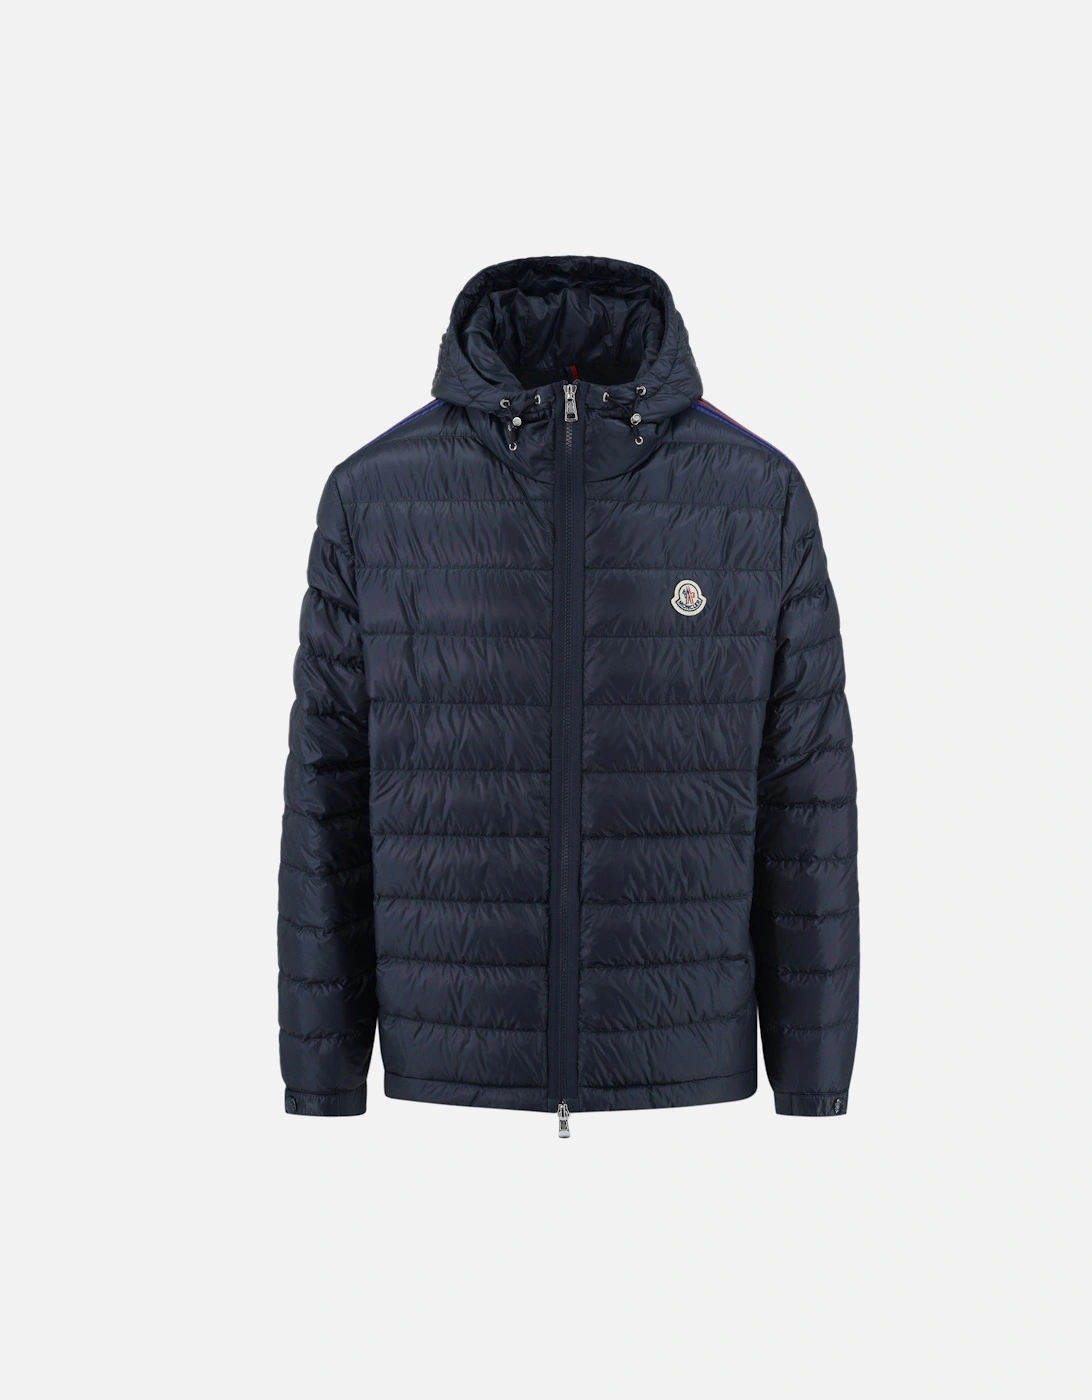 Agout Jacket Navy, 10 of 9